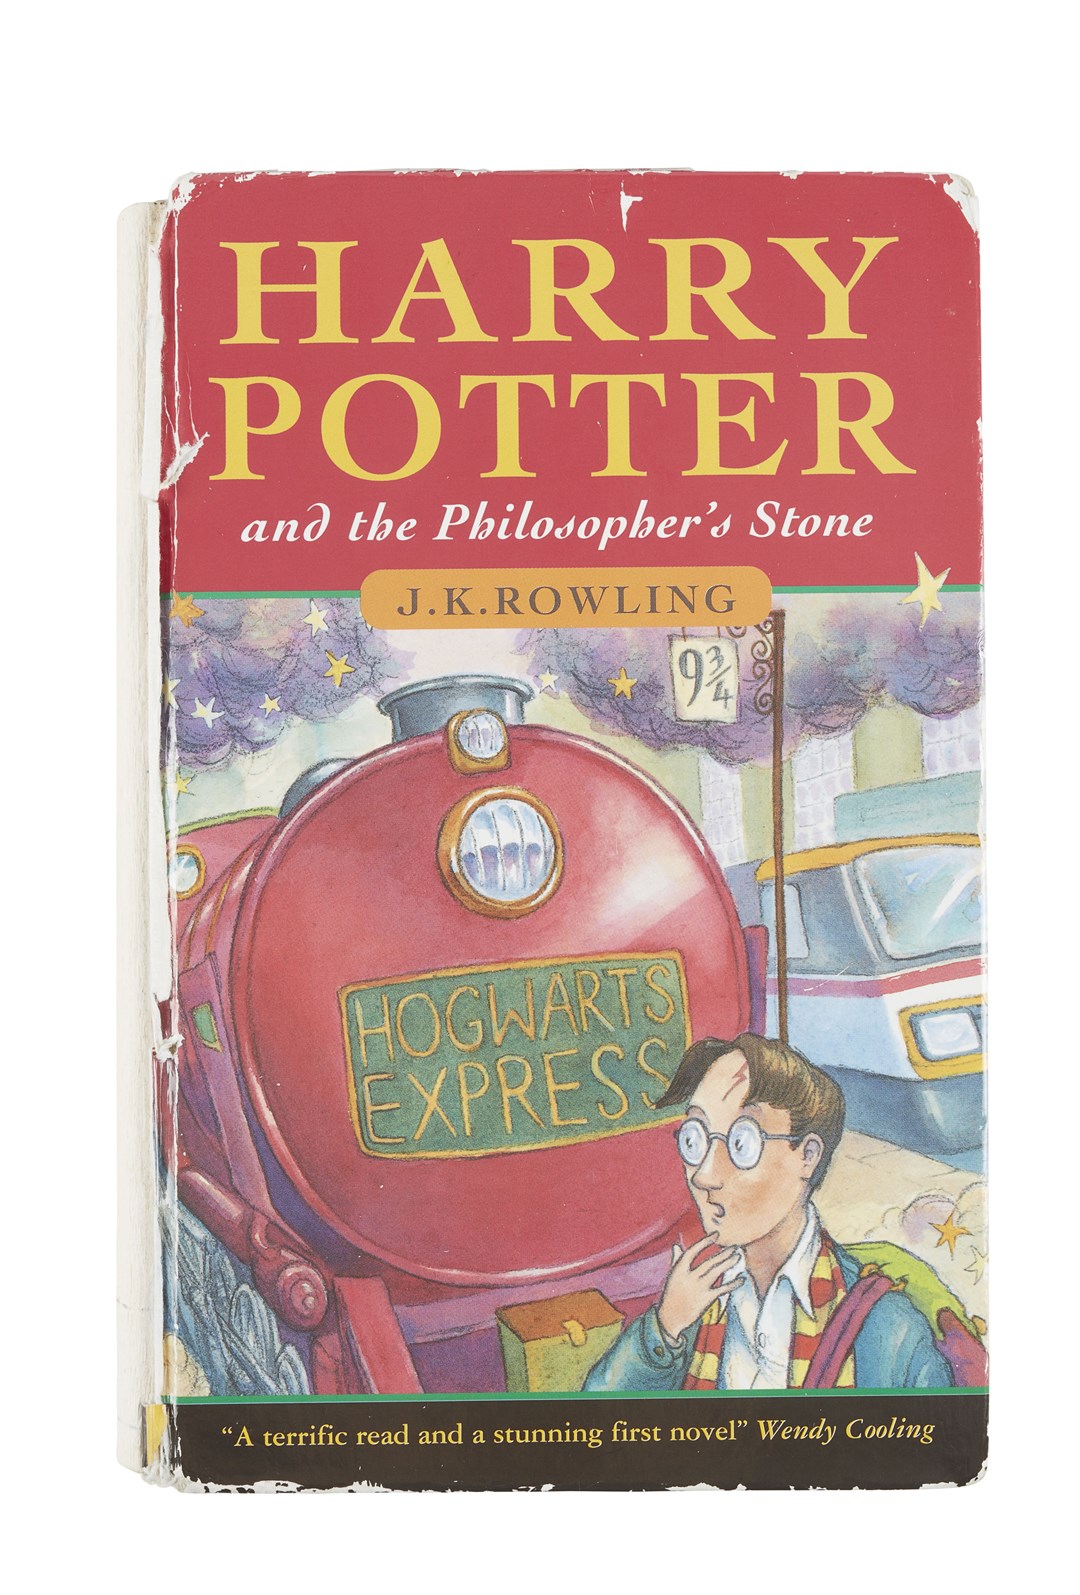 The first edition Harry Potter book sold for more than £20,000 (Lyon & Turnbull/PA)